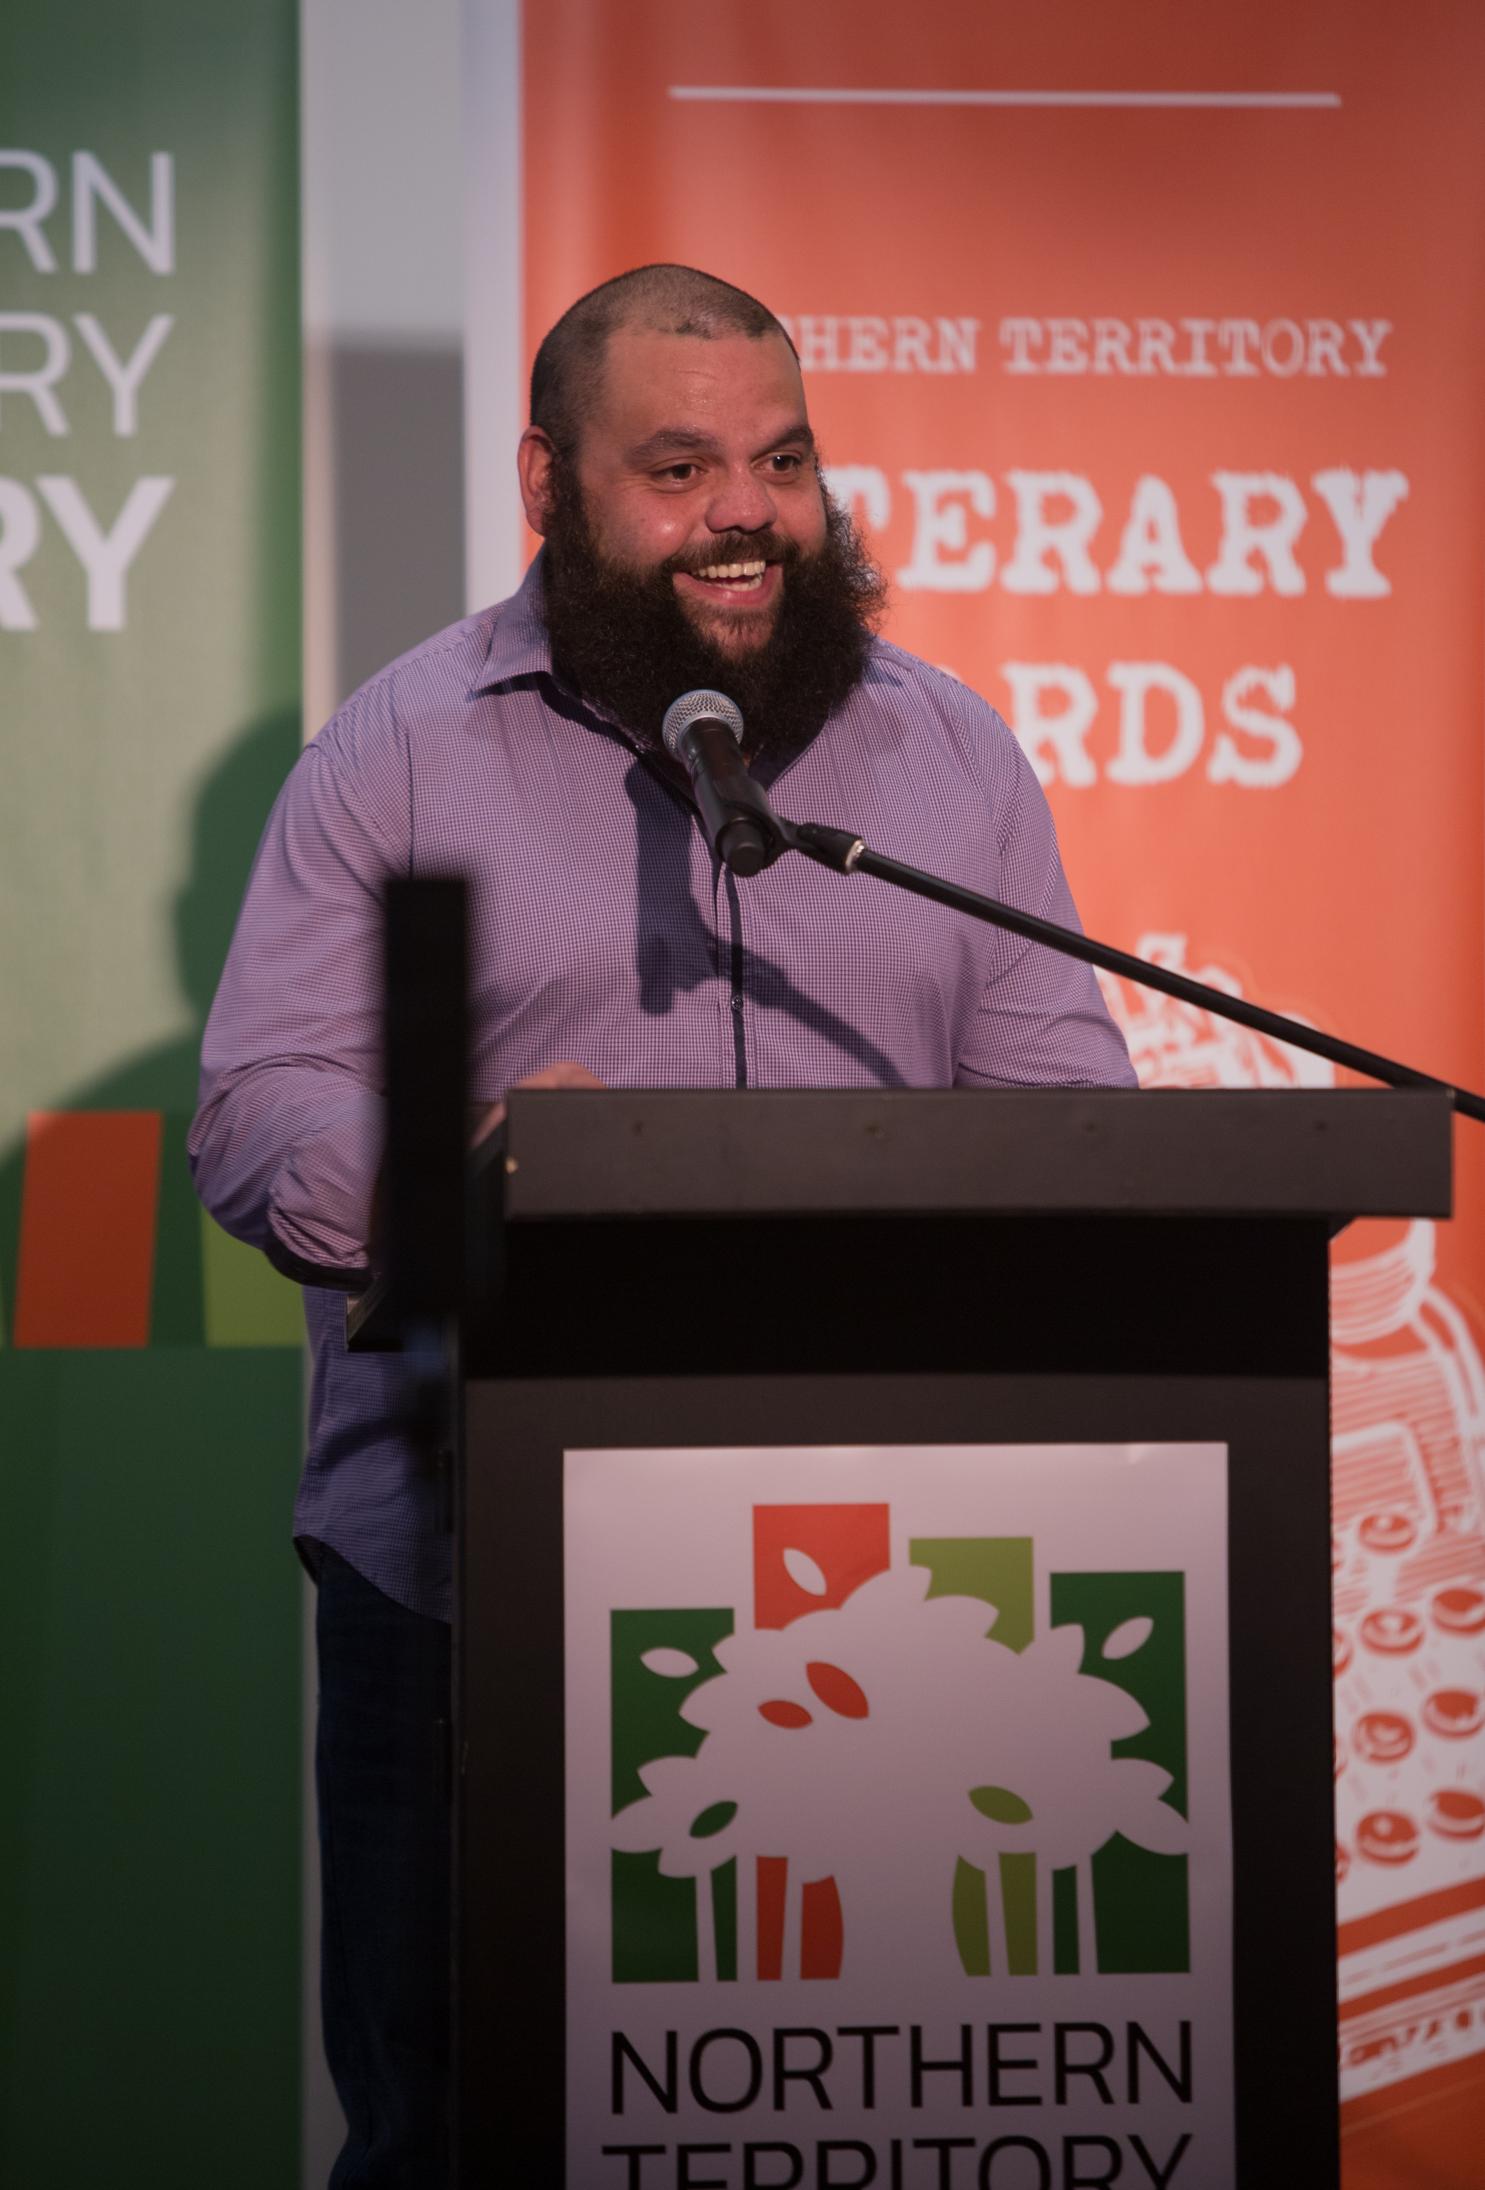 Man wearing purple shirt with a large bushy beard standing behind a lectern smiling and talking with audience. Behind him are green and orange banners. 